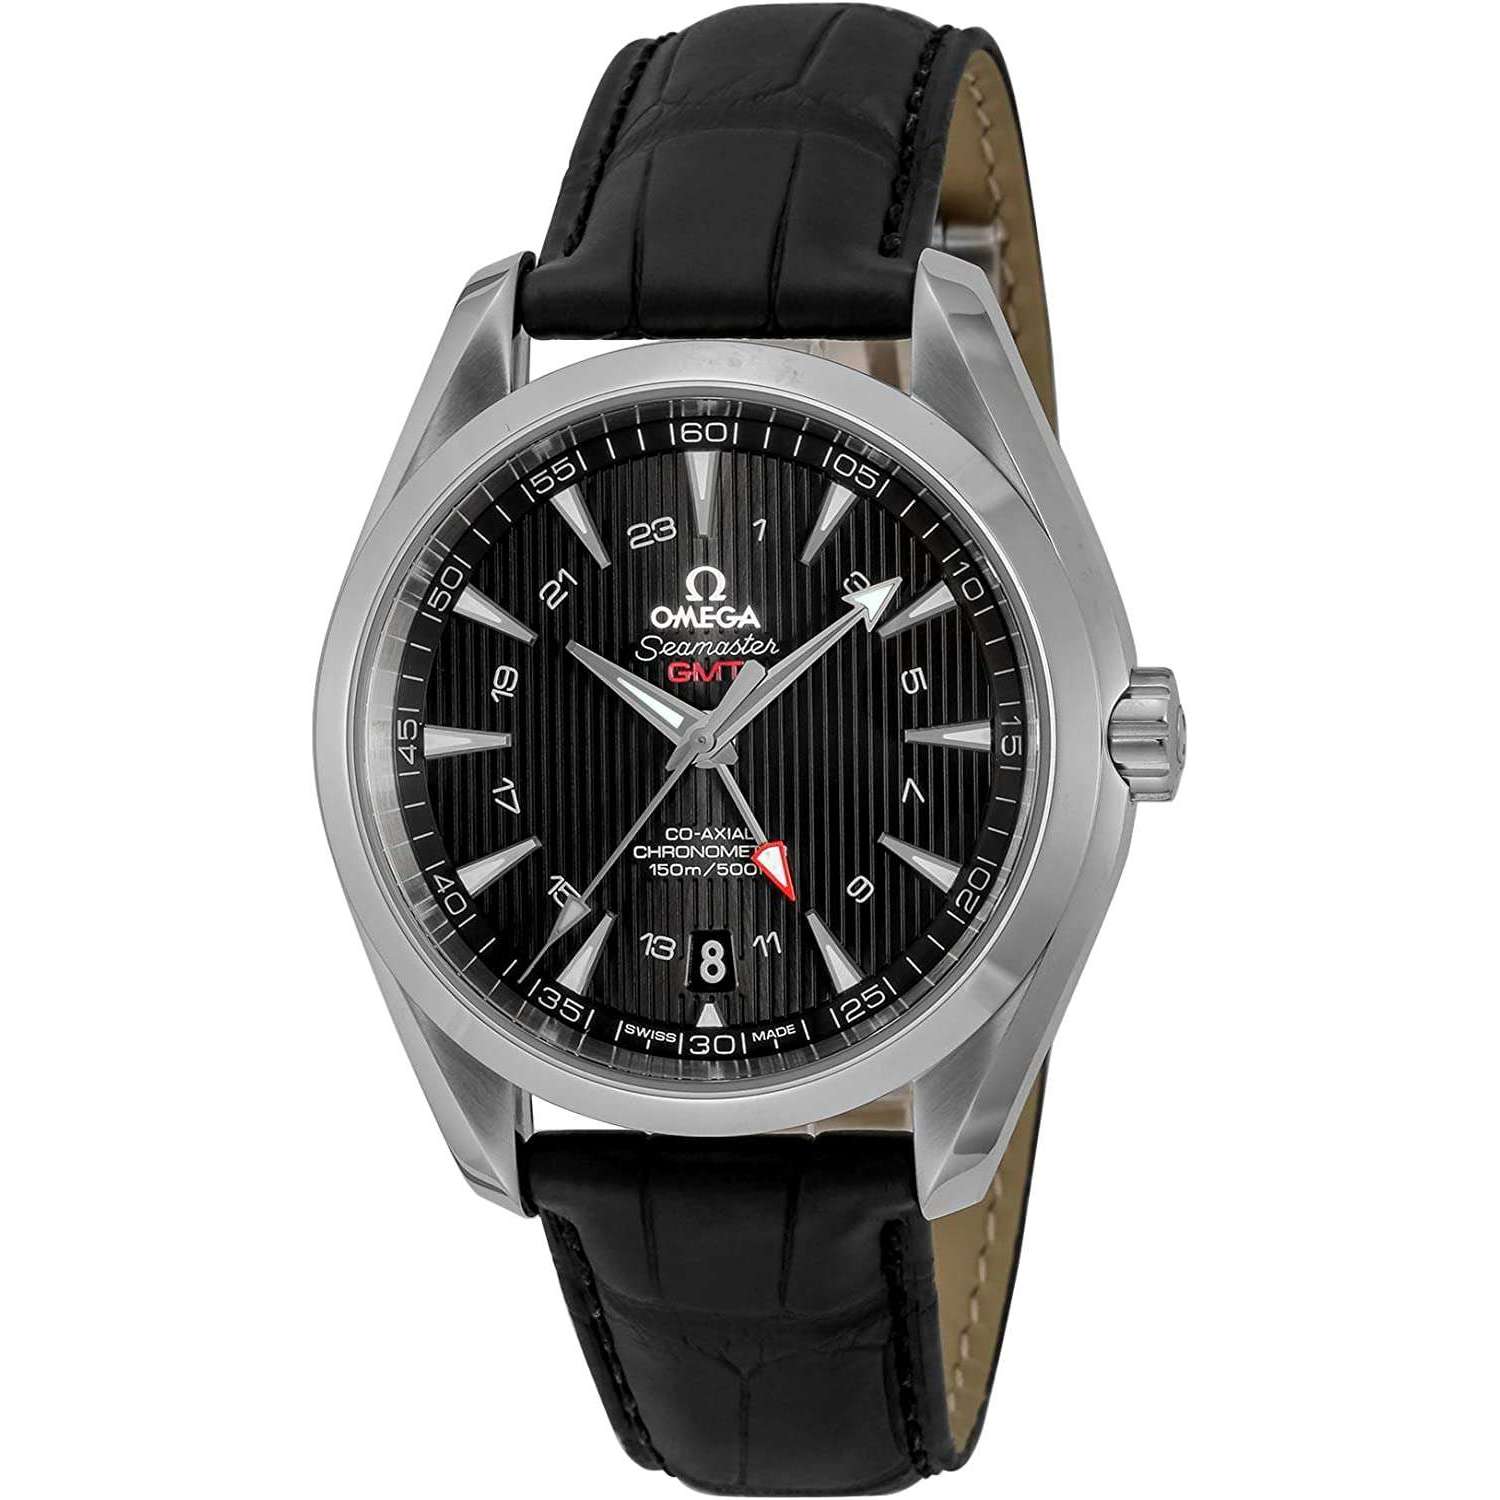 ROOK JAPAN:OMEGA SEAMASTER GMT CO-AXIAL CHRONOMETER 41 MM MEN WATCH 231.13.43.22.01.001,Luxury Watch,Omega